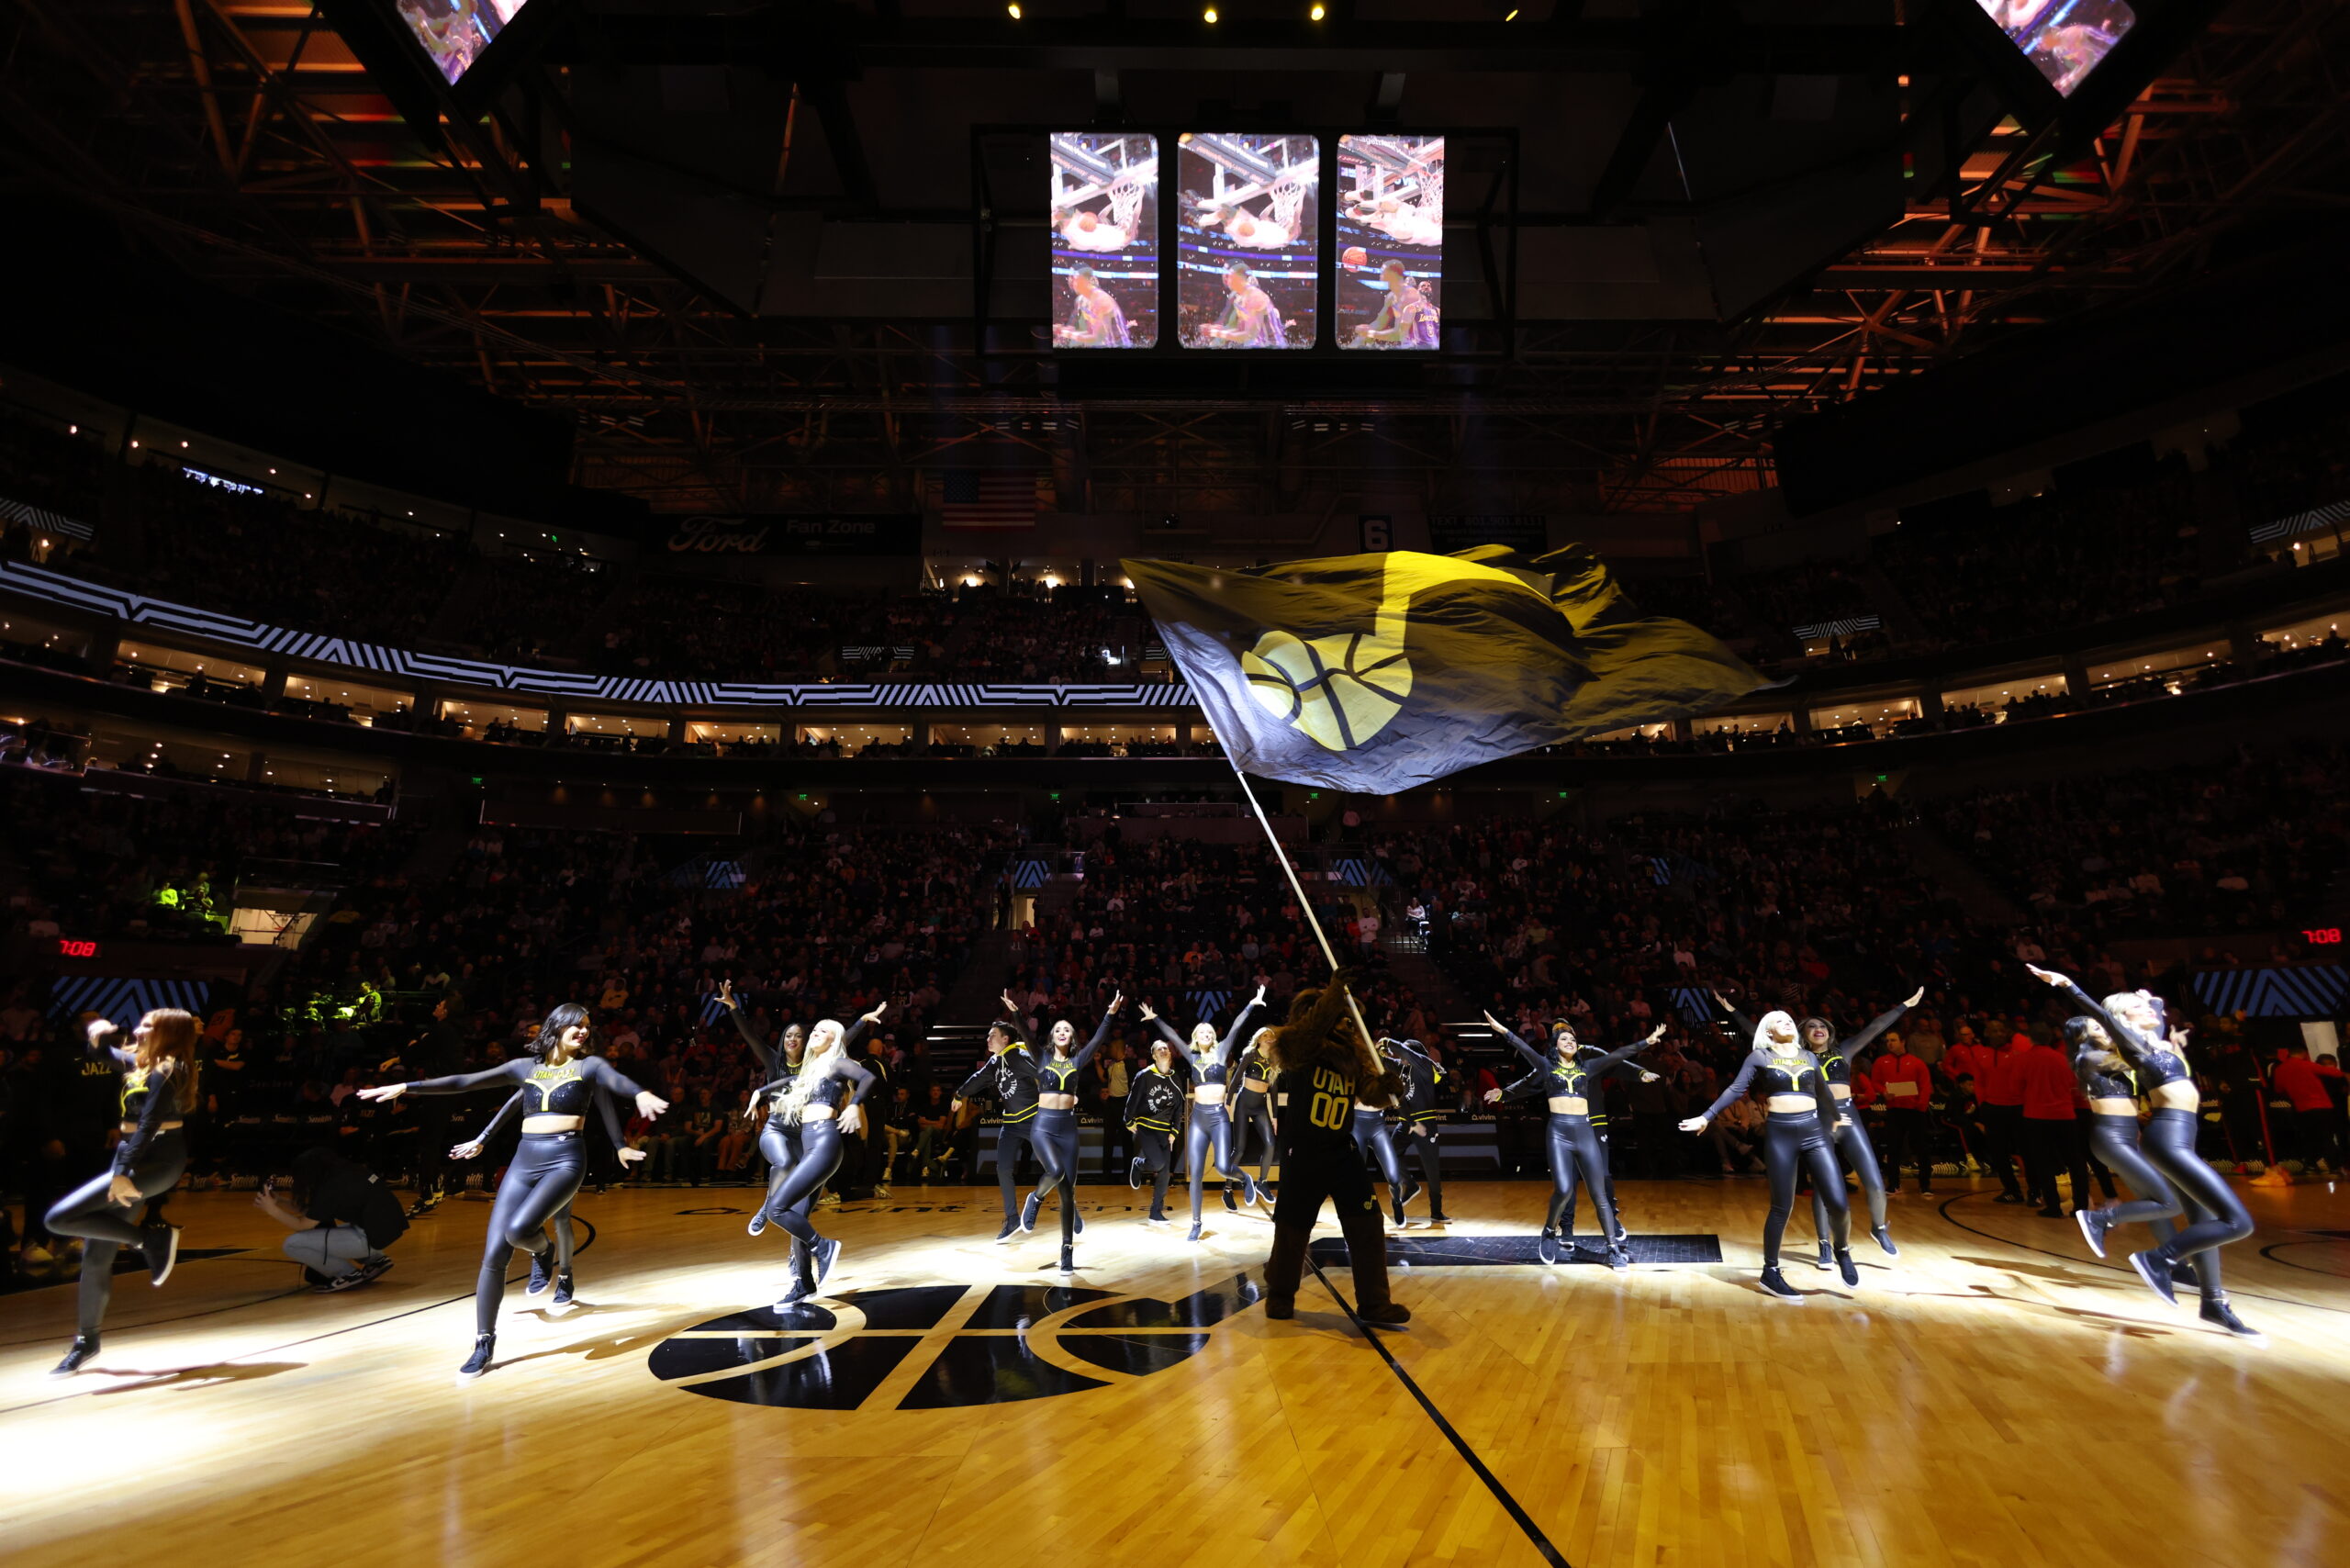 NBA All-Star provides nearly $250 million in economic impact to